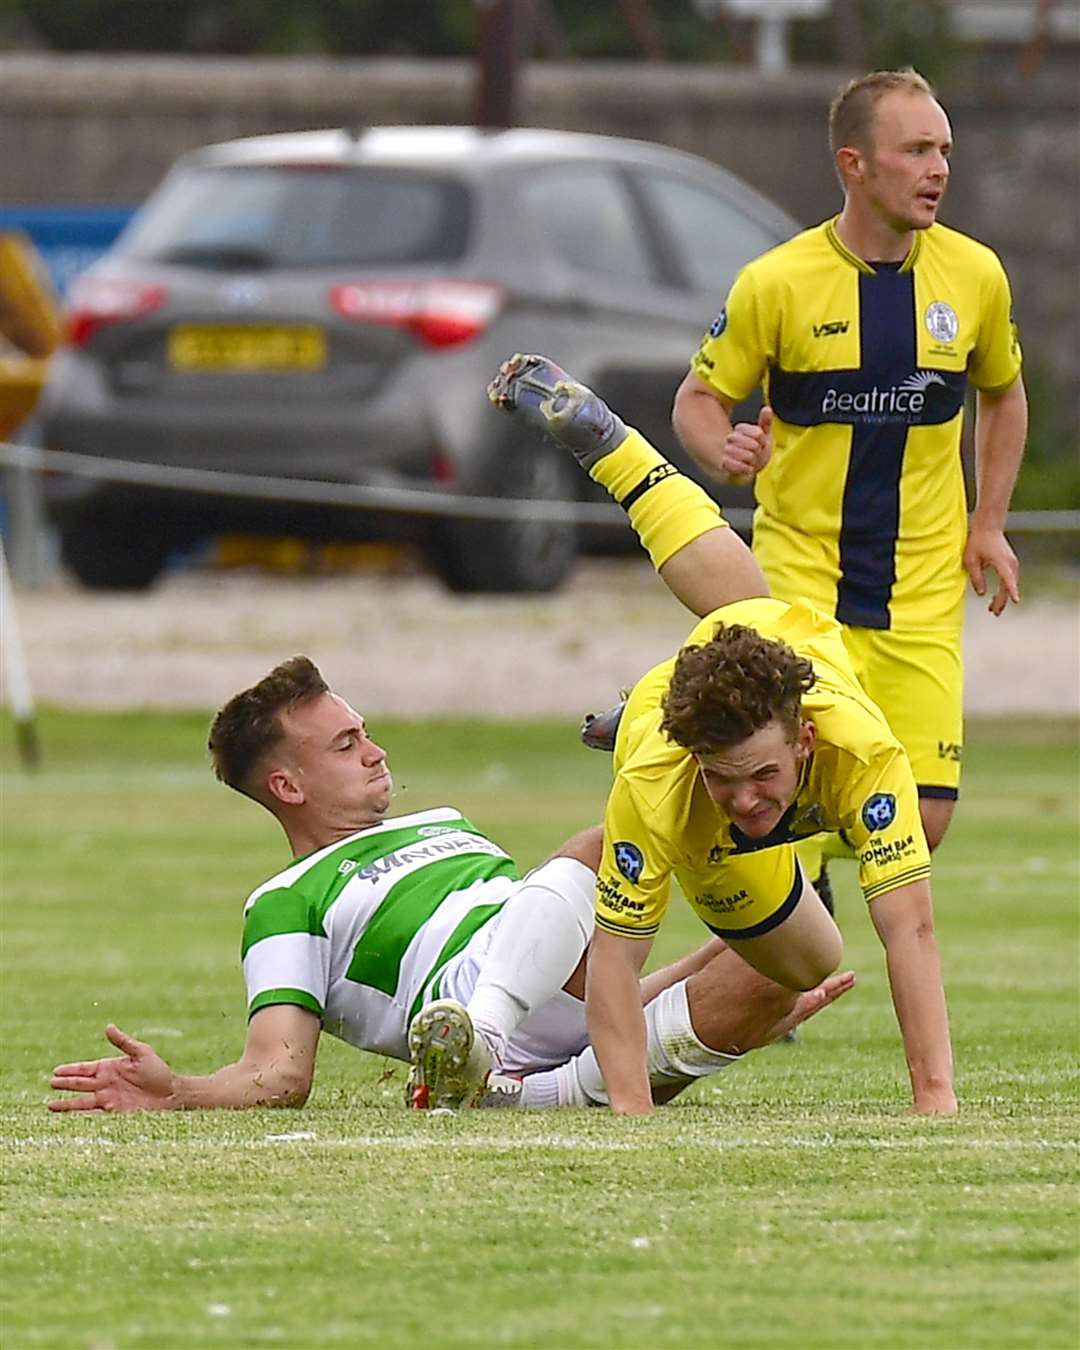 Mark Munro's match ended early after he was caught by a hefty challenge from Buckie's Sam Pugh. Picture: Mel Roger